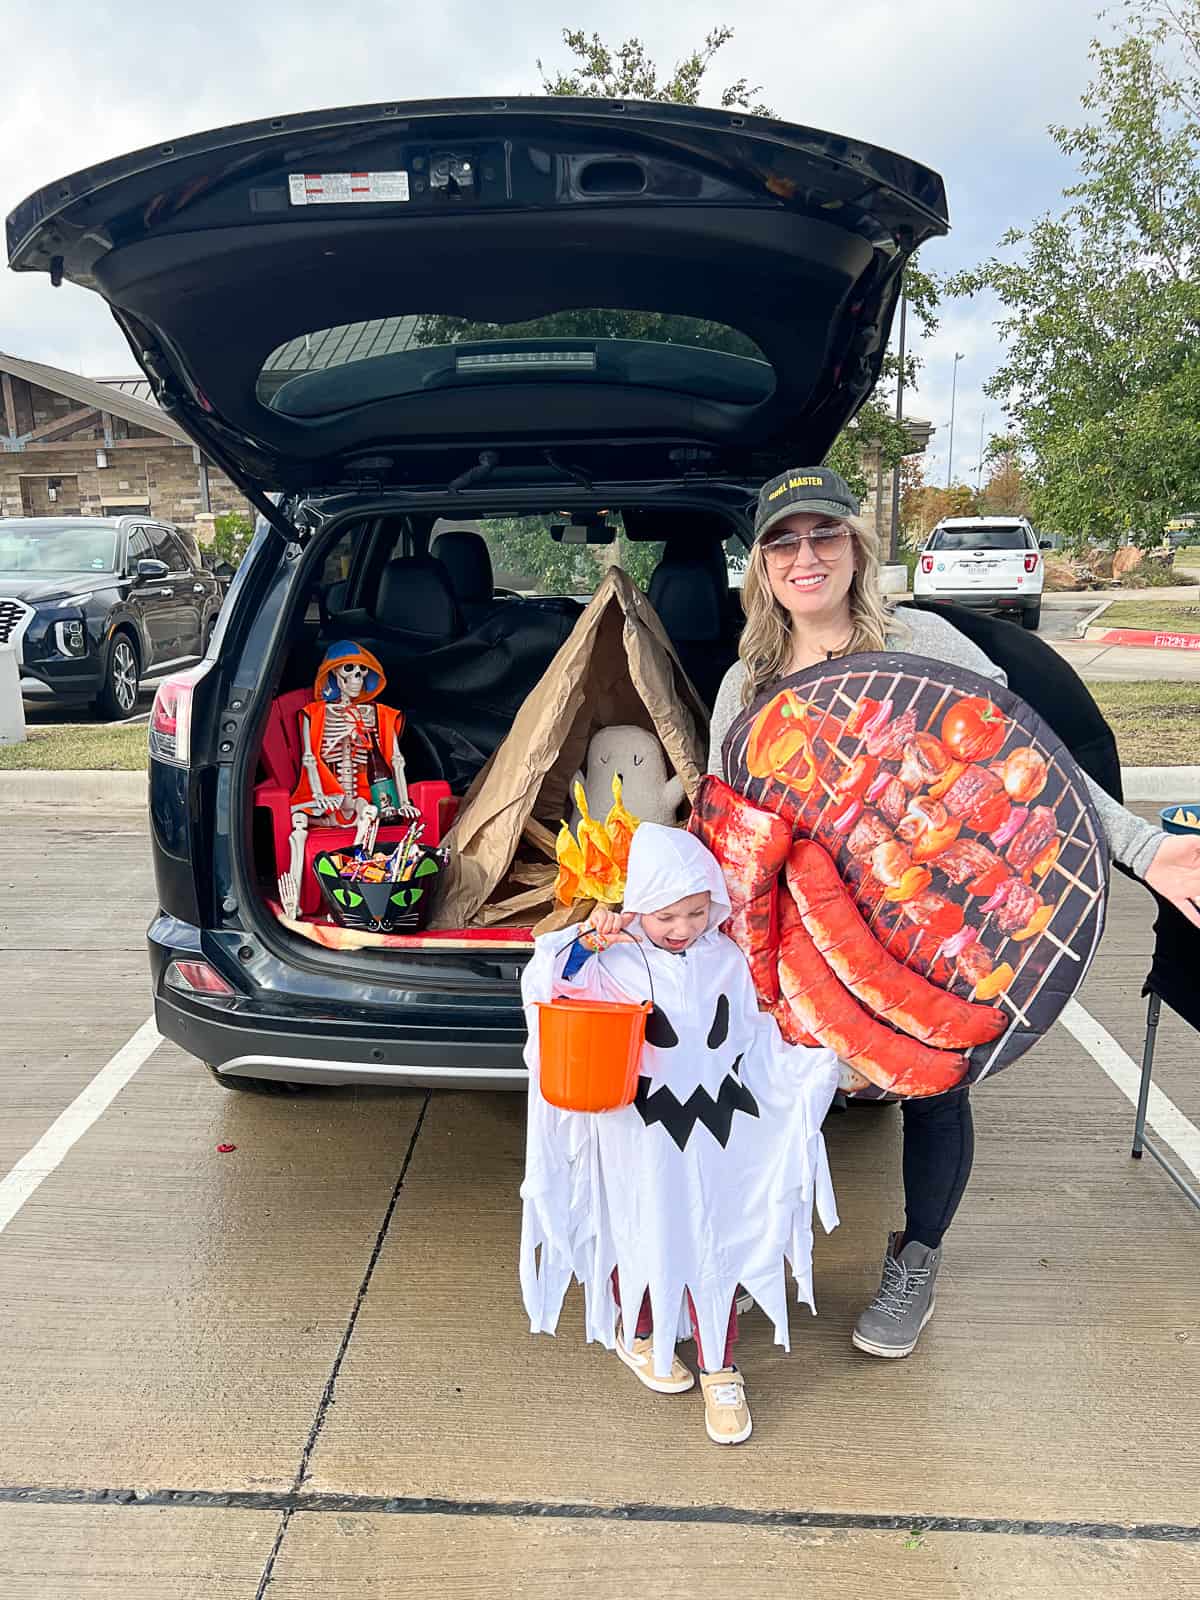 BBQ grill halloween costume and trunk or treat campsite decor idea with Jenna Passaro from sip bite go